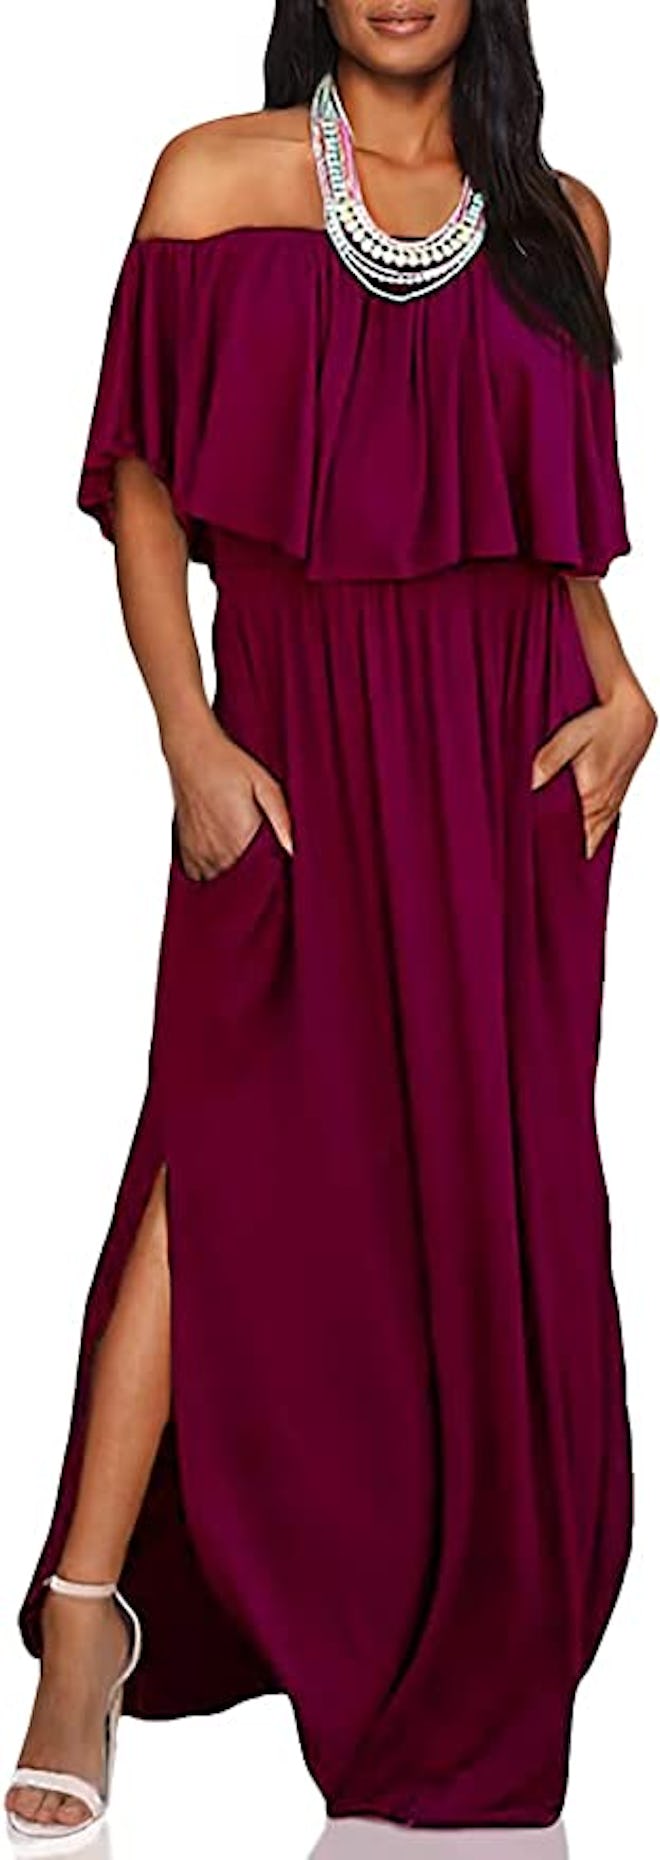 LILBETTER Off The Shoulder Ruffle Maxi Dress